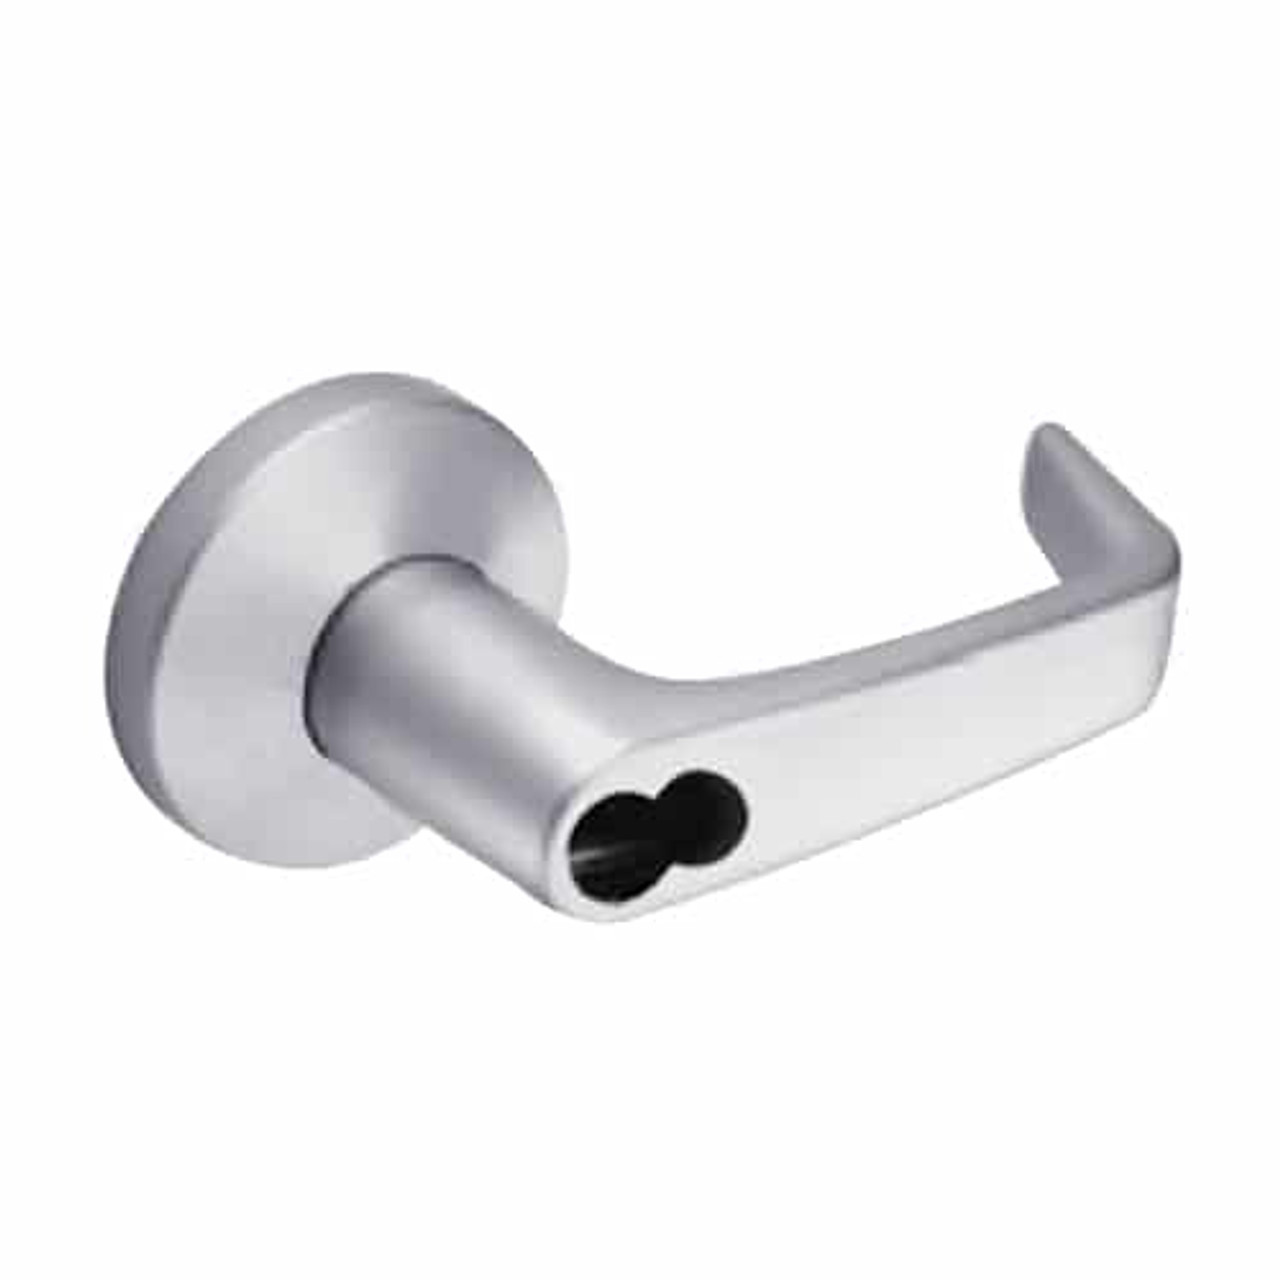 9K37C15KS3626LM Best 9K Series Corridor Cylindrical Lever Locks with Contour Angle with Return Lever Design Accept 7 Pin Best Core in Satin Chrome